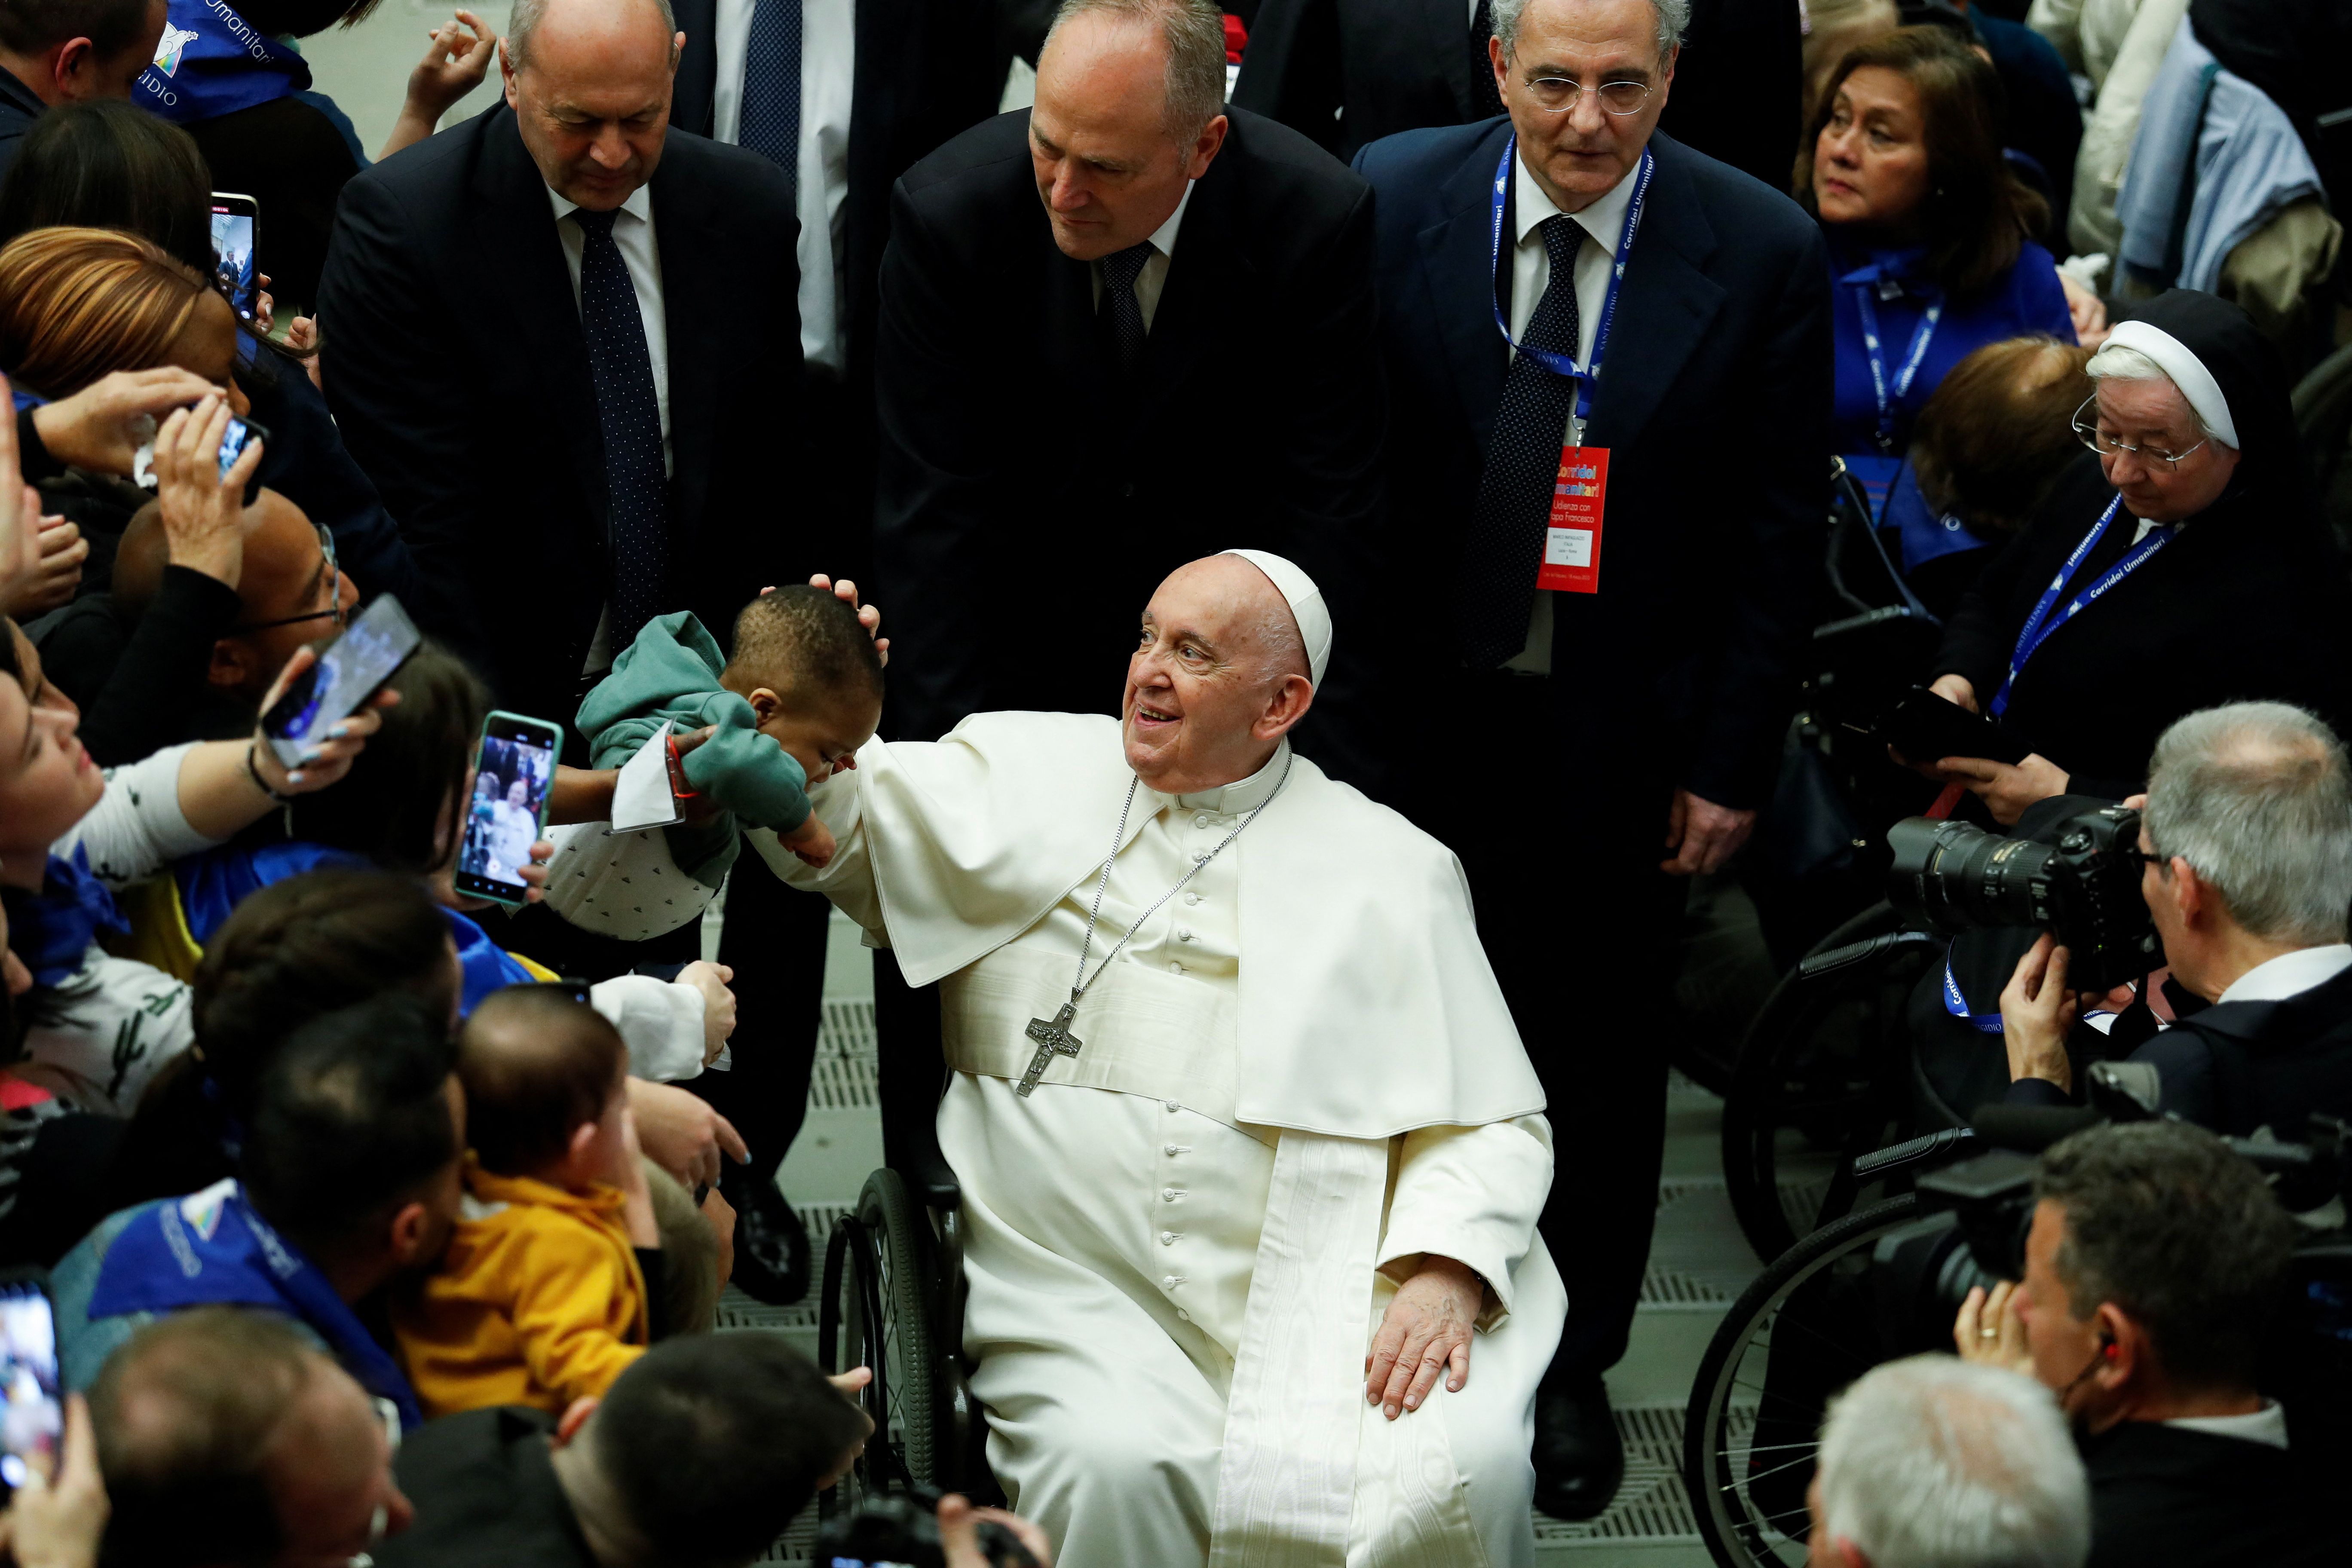 Pope's support for refugee 'humanitarian corridors'